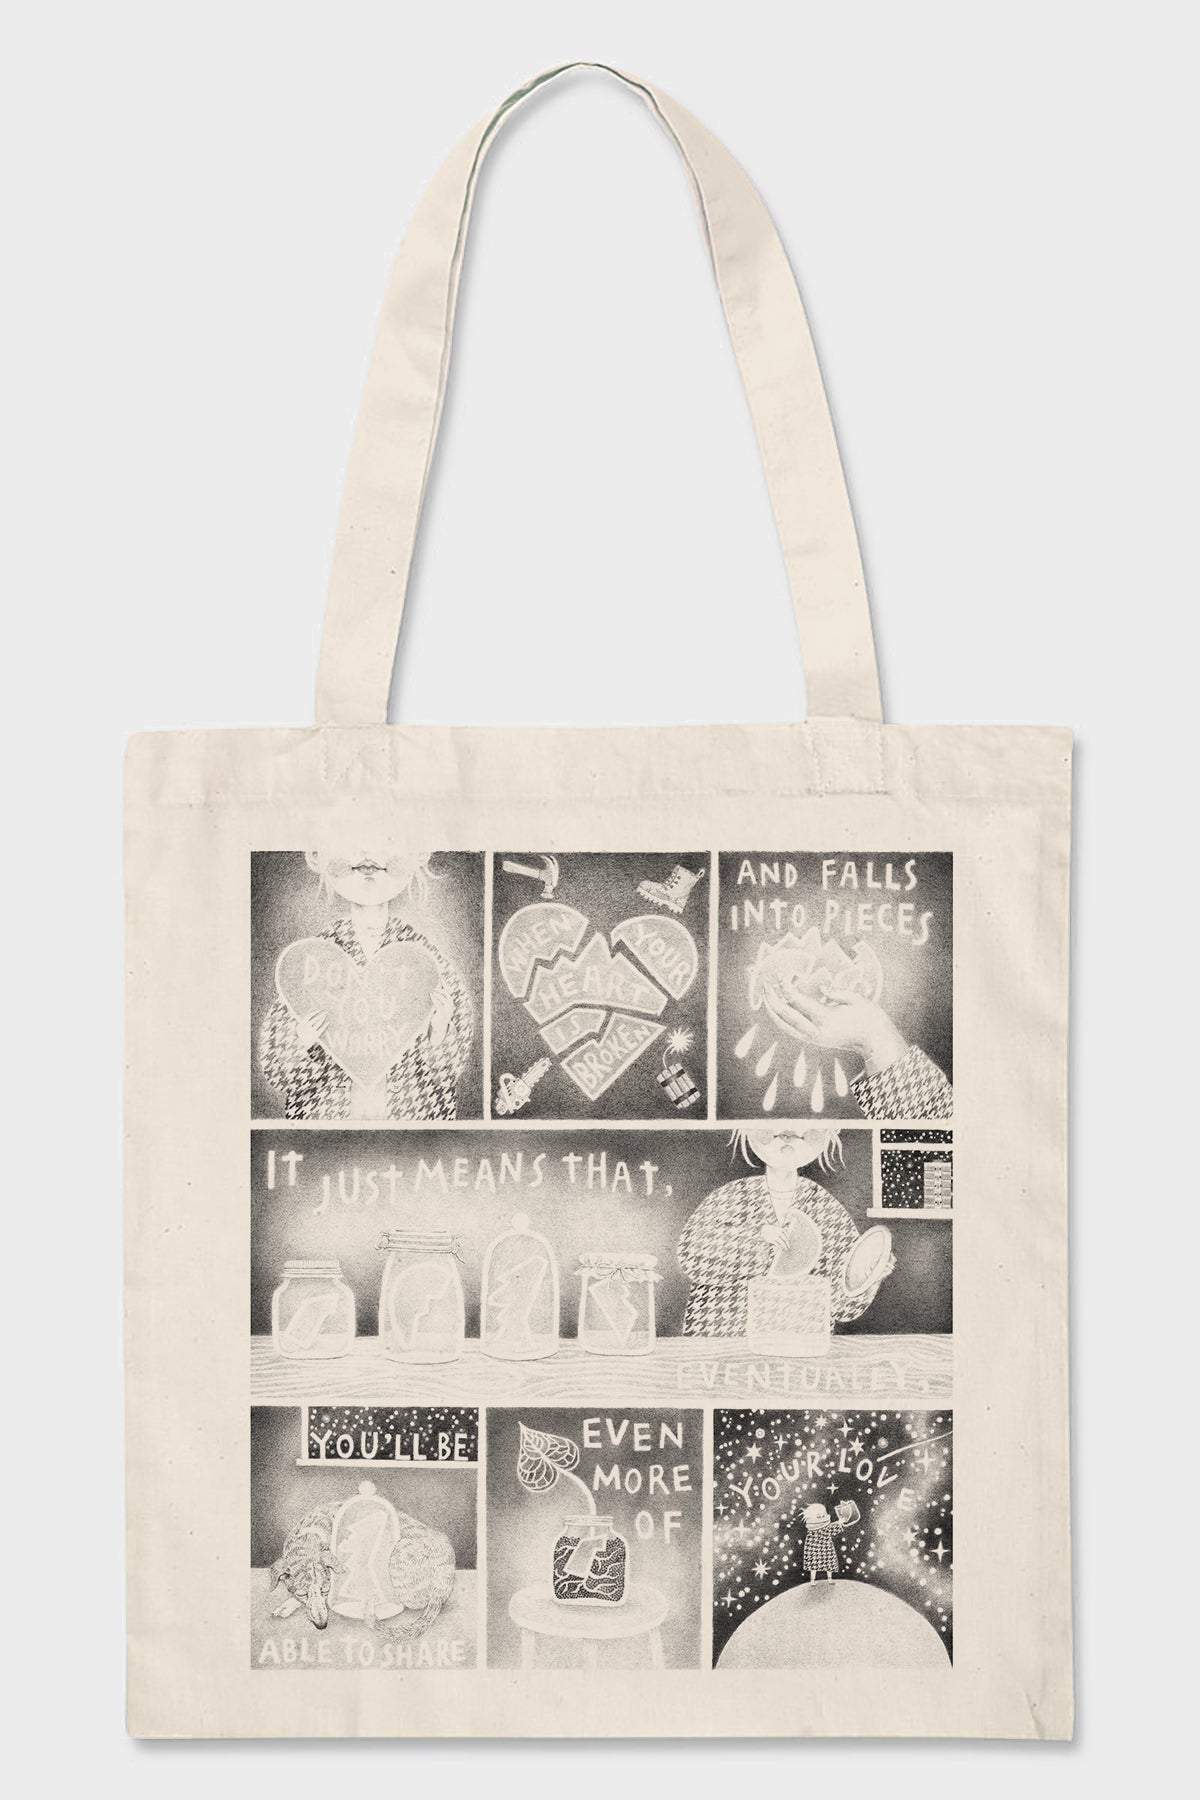 Share Your LOVE Tote Bag